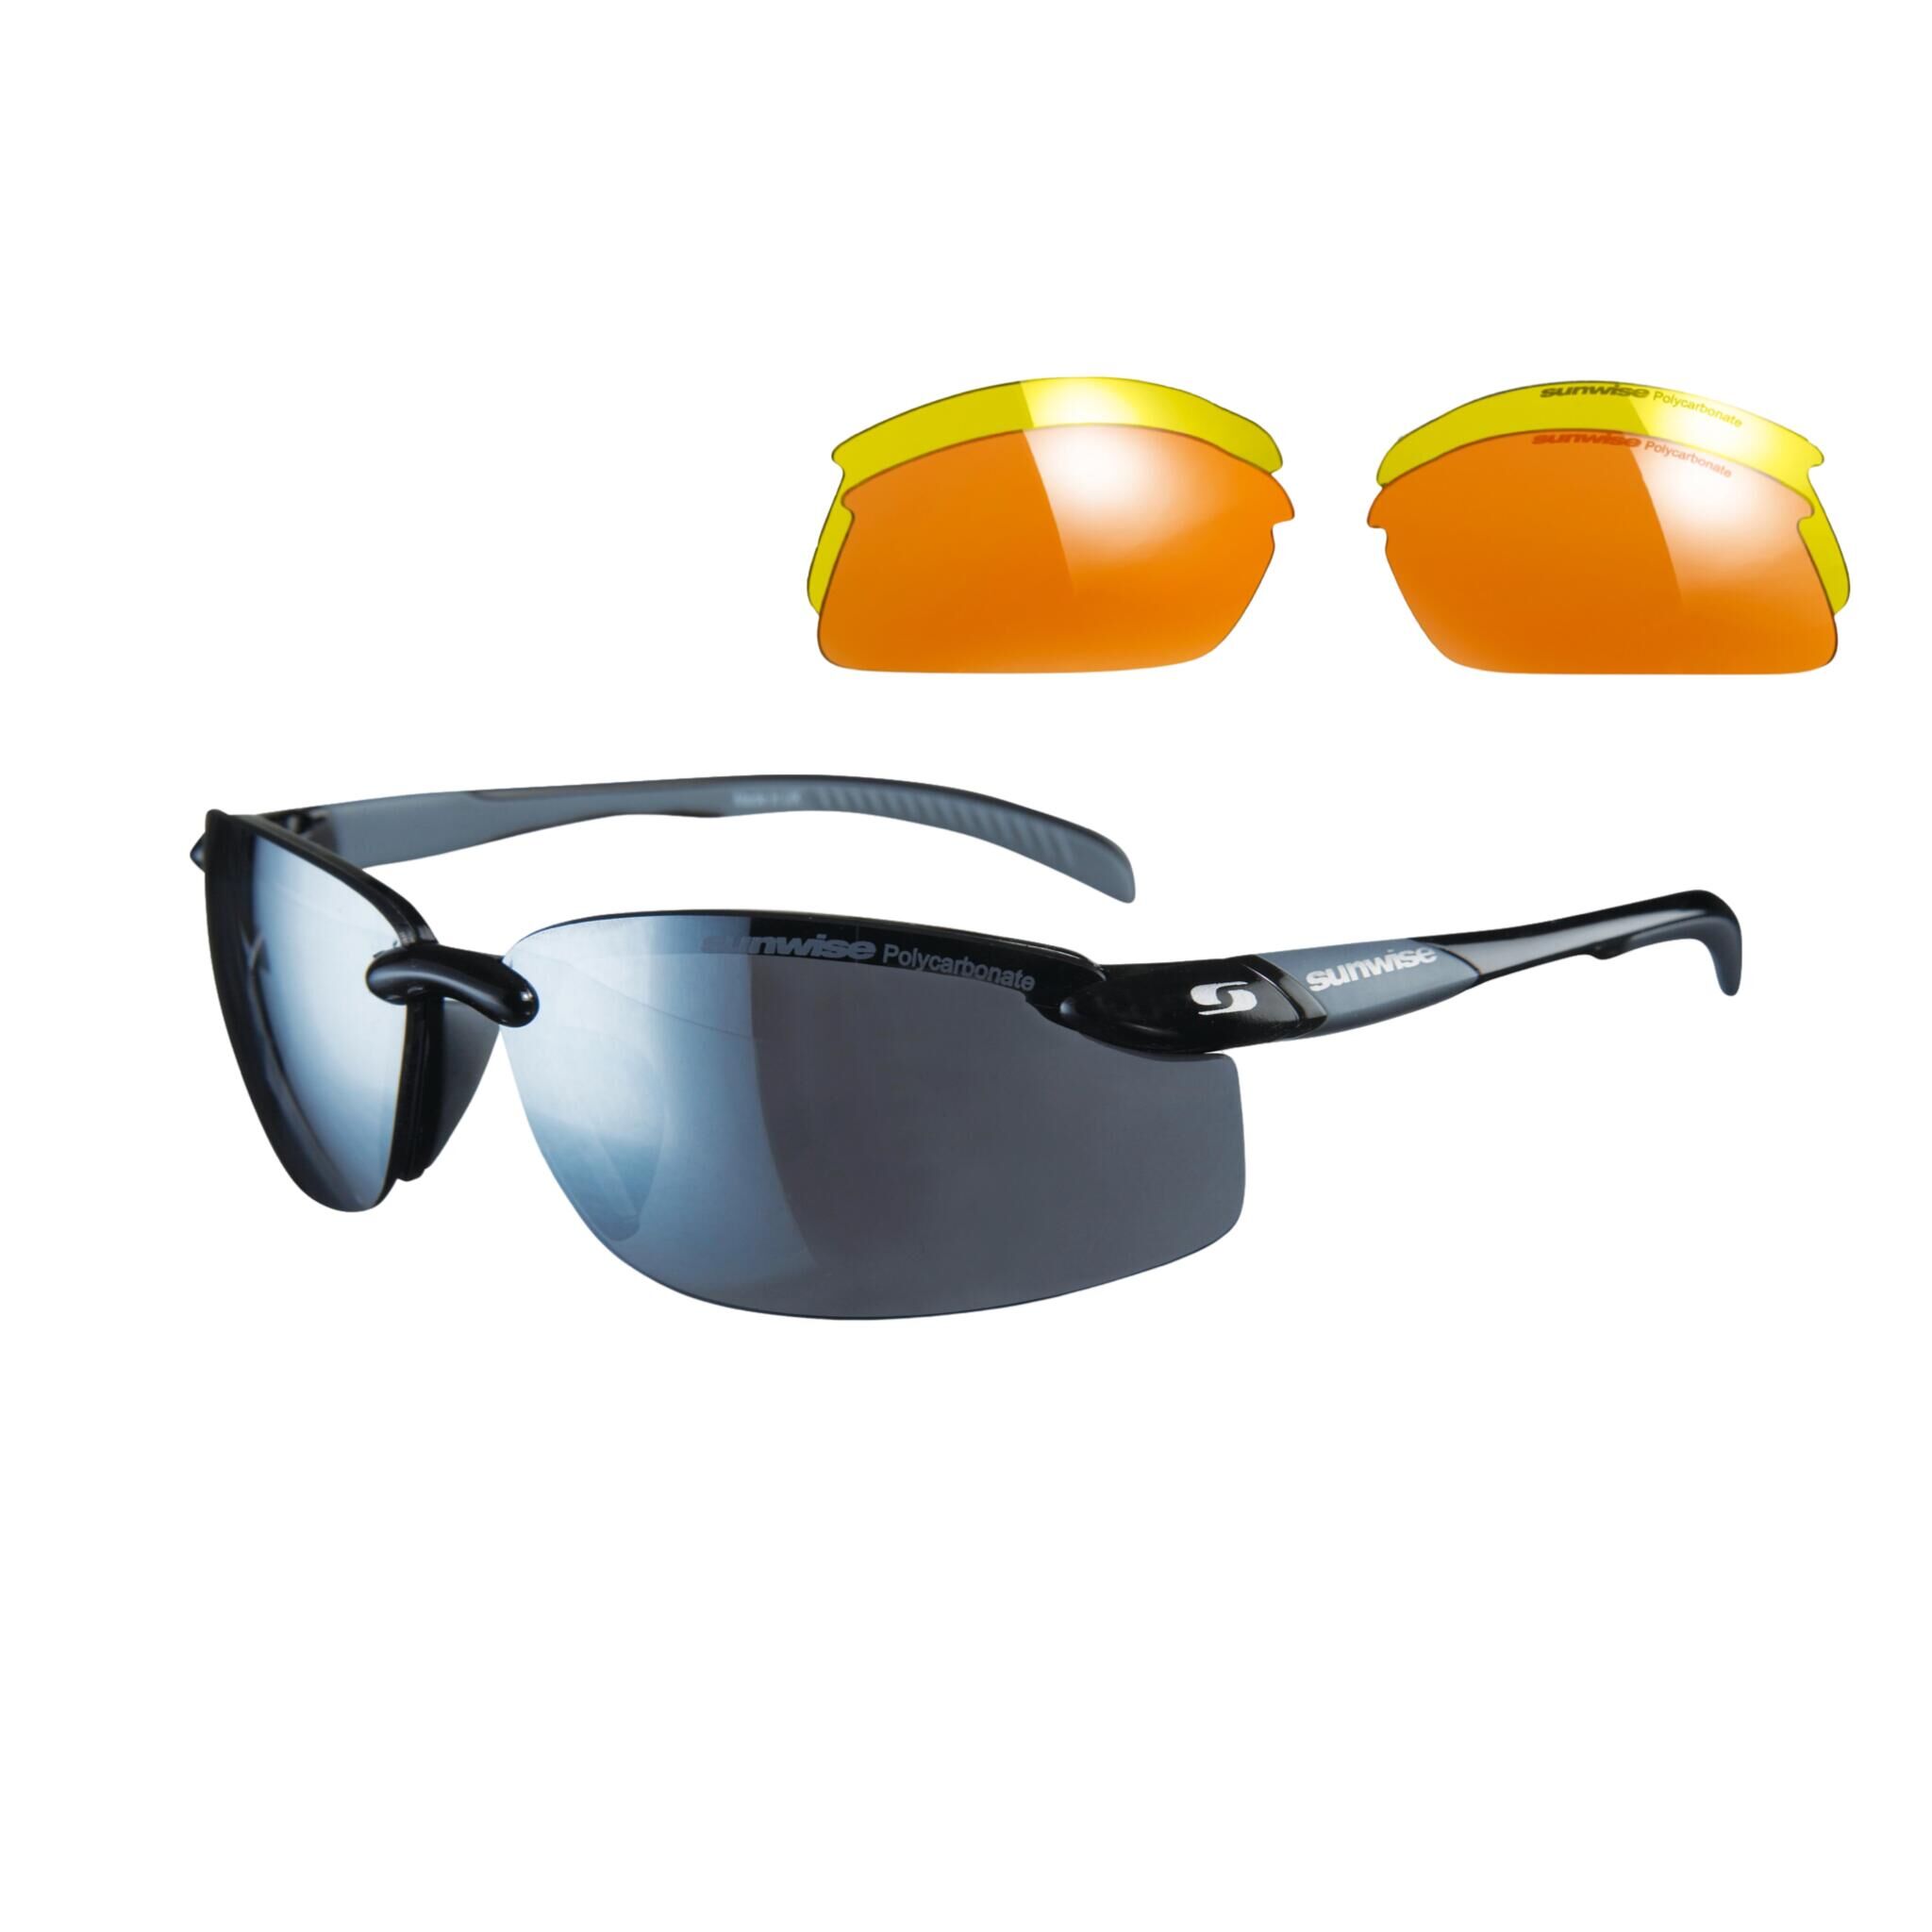 SUNWISE Pacific Sports Sunglasses - Category 1-3